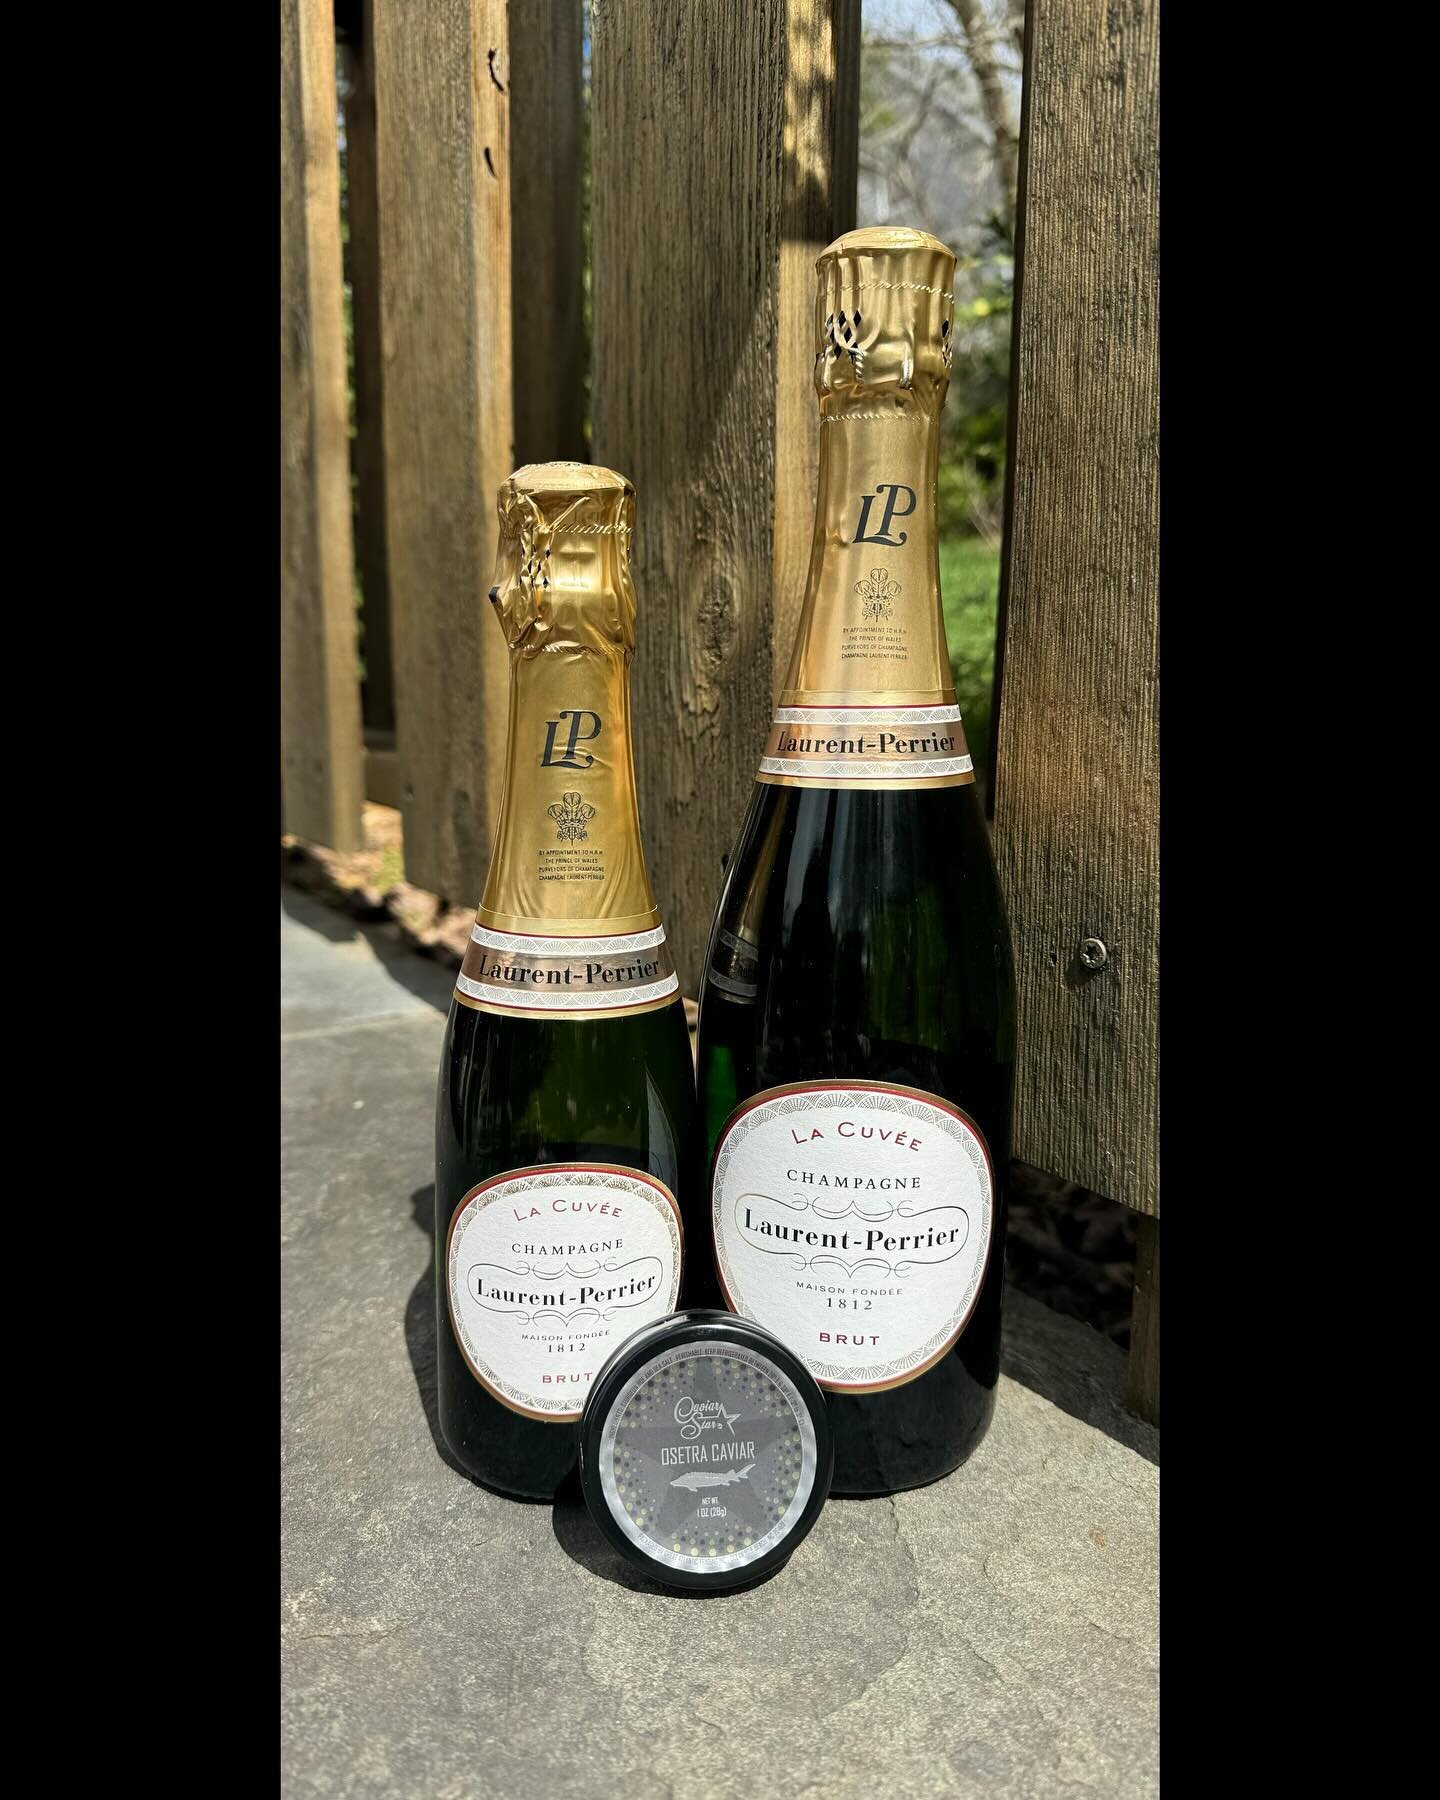 Looking for a little treat this weekend? We&rsquo;ve got just the thing!

Nothing pairs better than Osetra caviar and Laurent-Perrier! Try our new caviar service and a bottle of bubbles this weekend! 🍾🥂